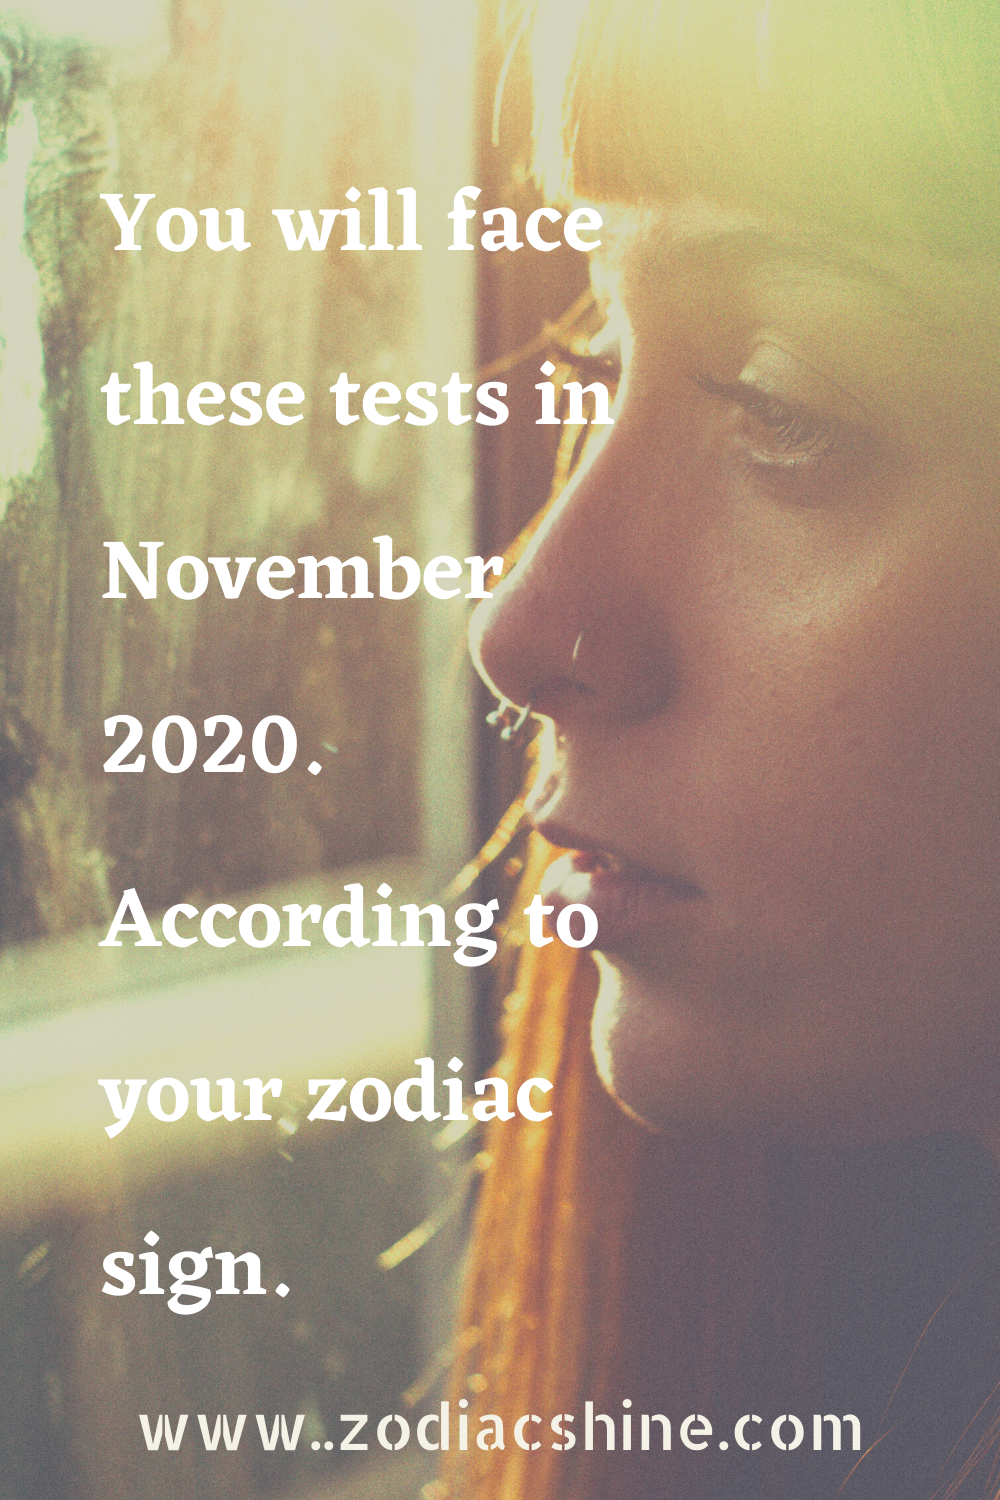 You will face these tests in November 2020. According to your zodiac sign.